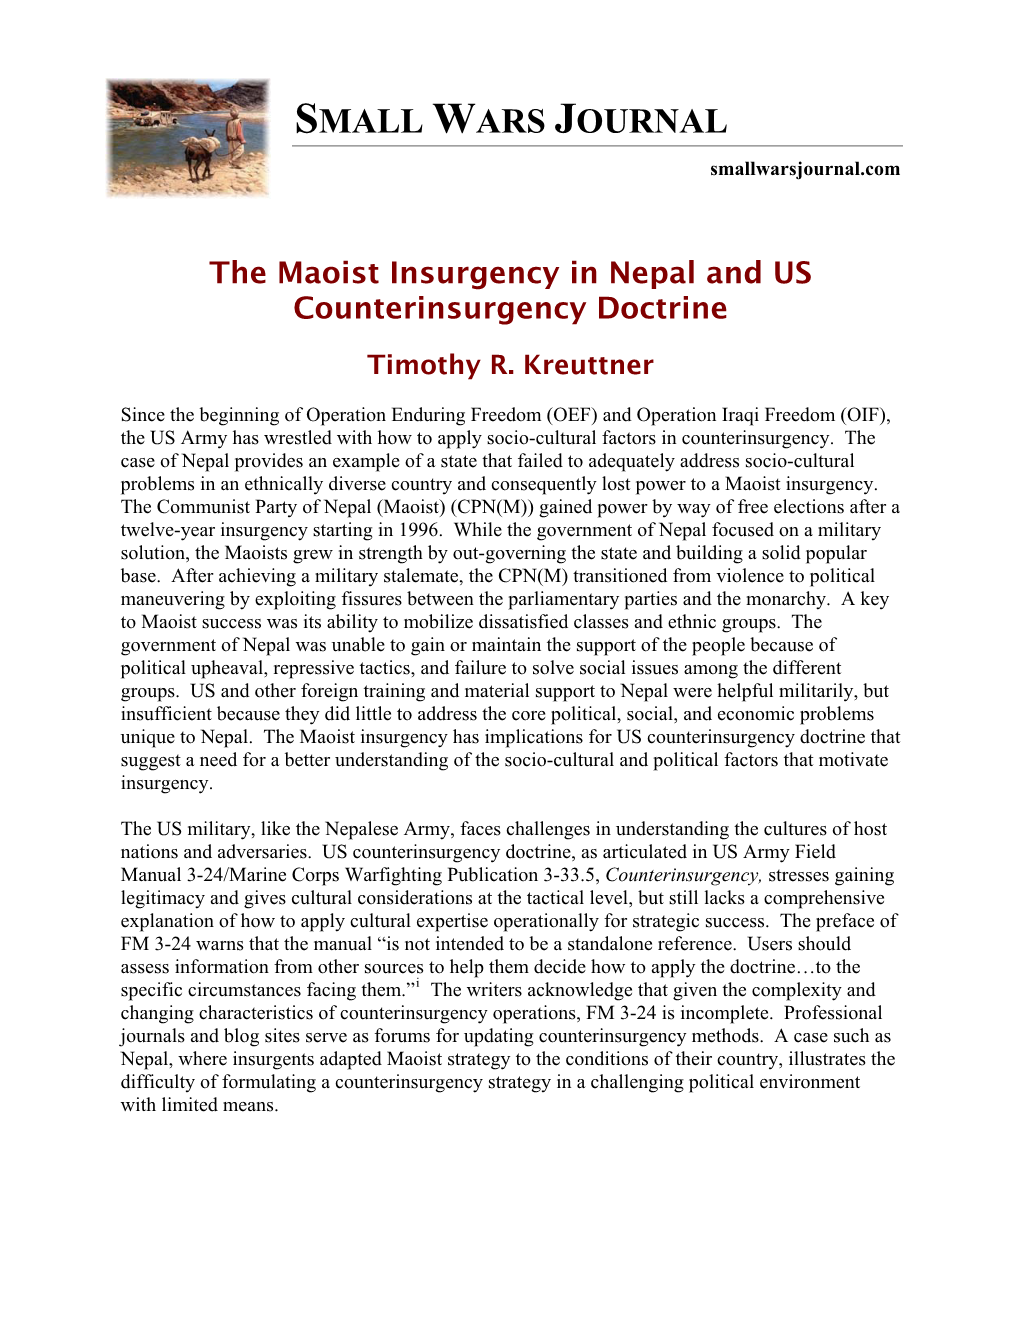 The Maoist Insurgency in Nepal and US Counterinsurgency Doctrine